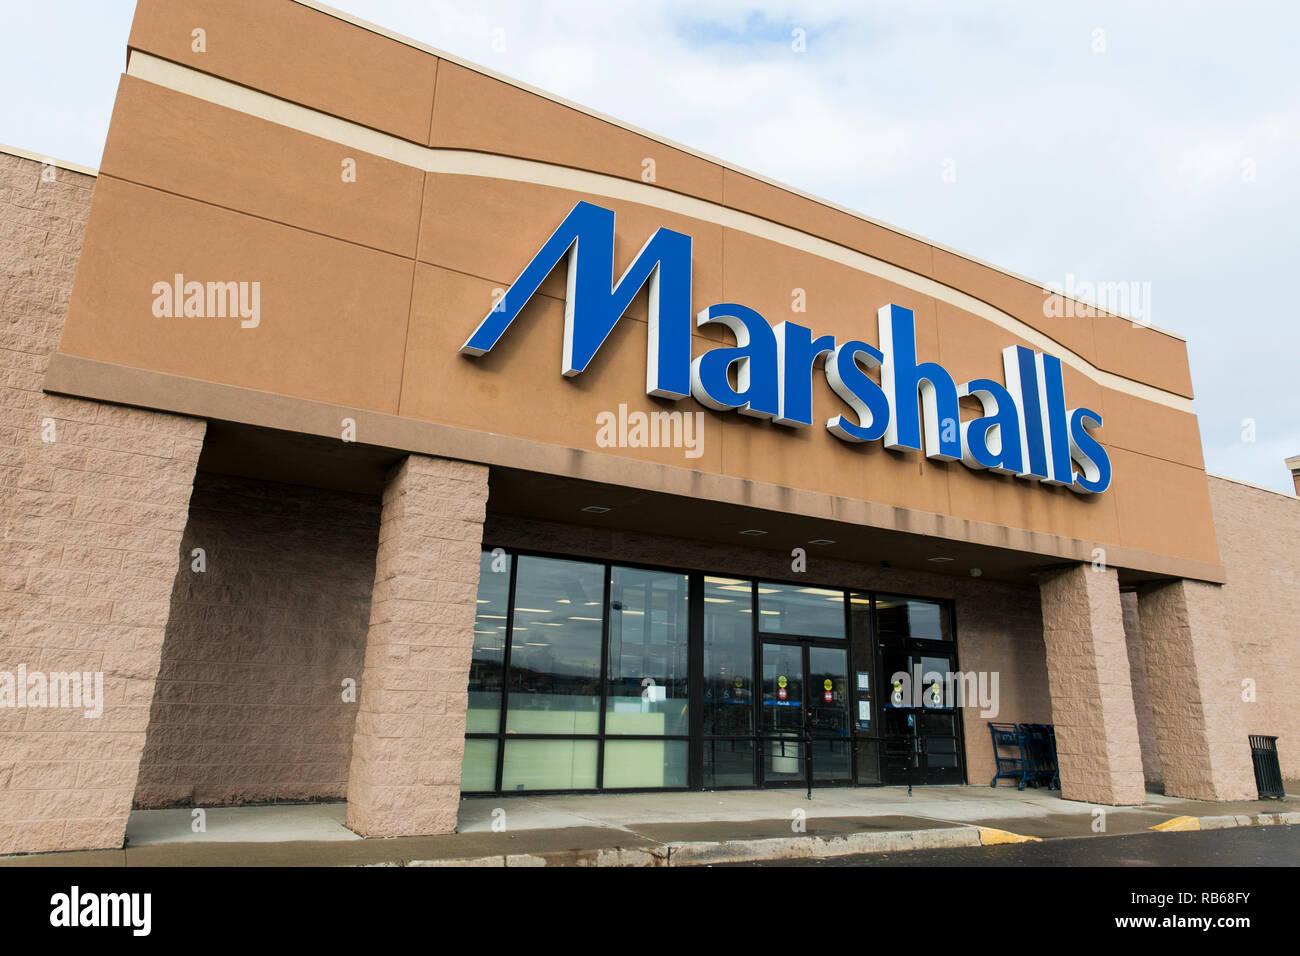 A logo sign outside of a Marshalls retail store in Wilkes-Barre, Pennsylvania, on December 30, 2018. Stock Photo